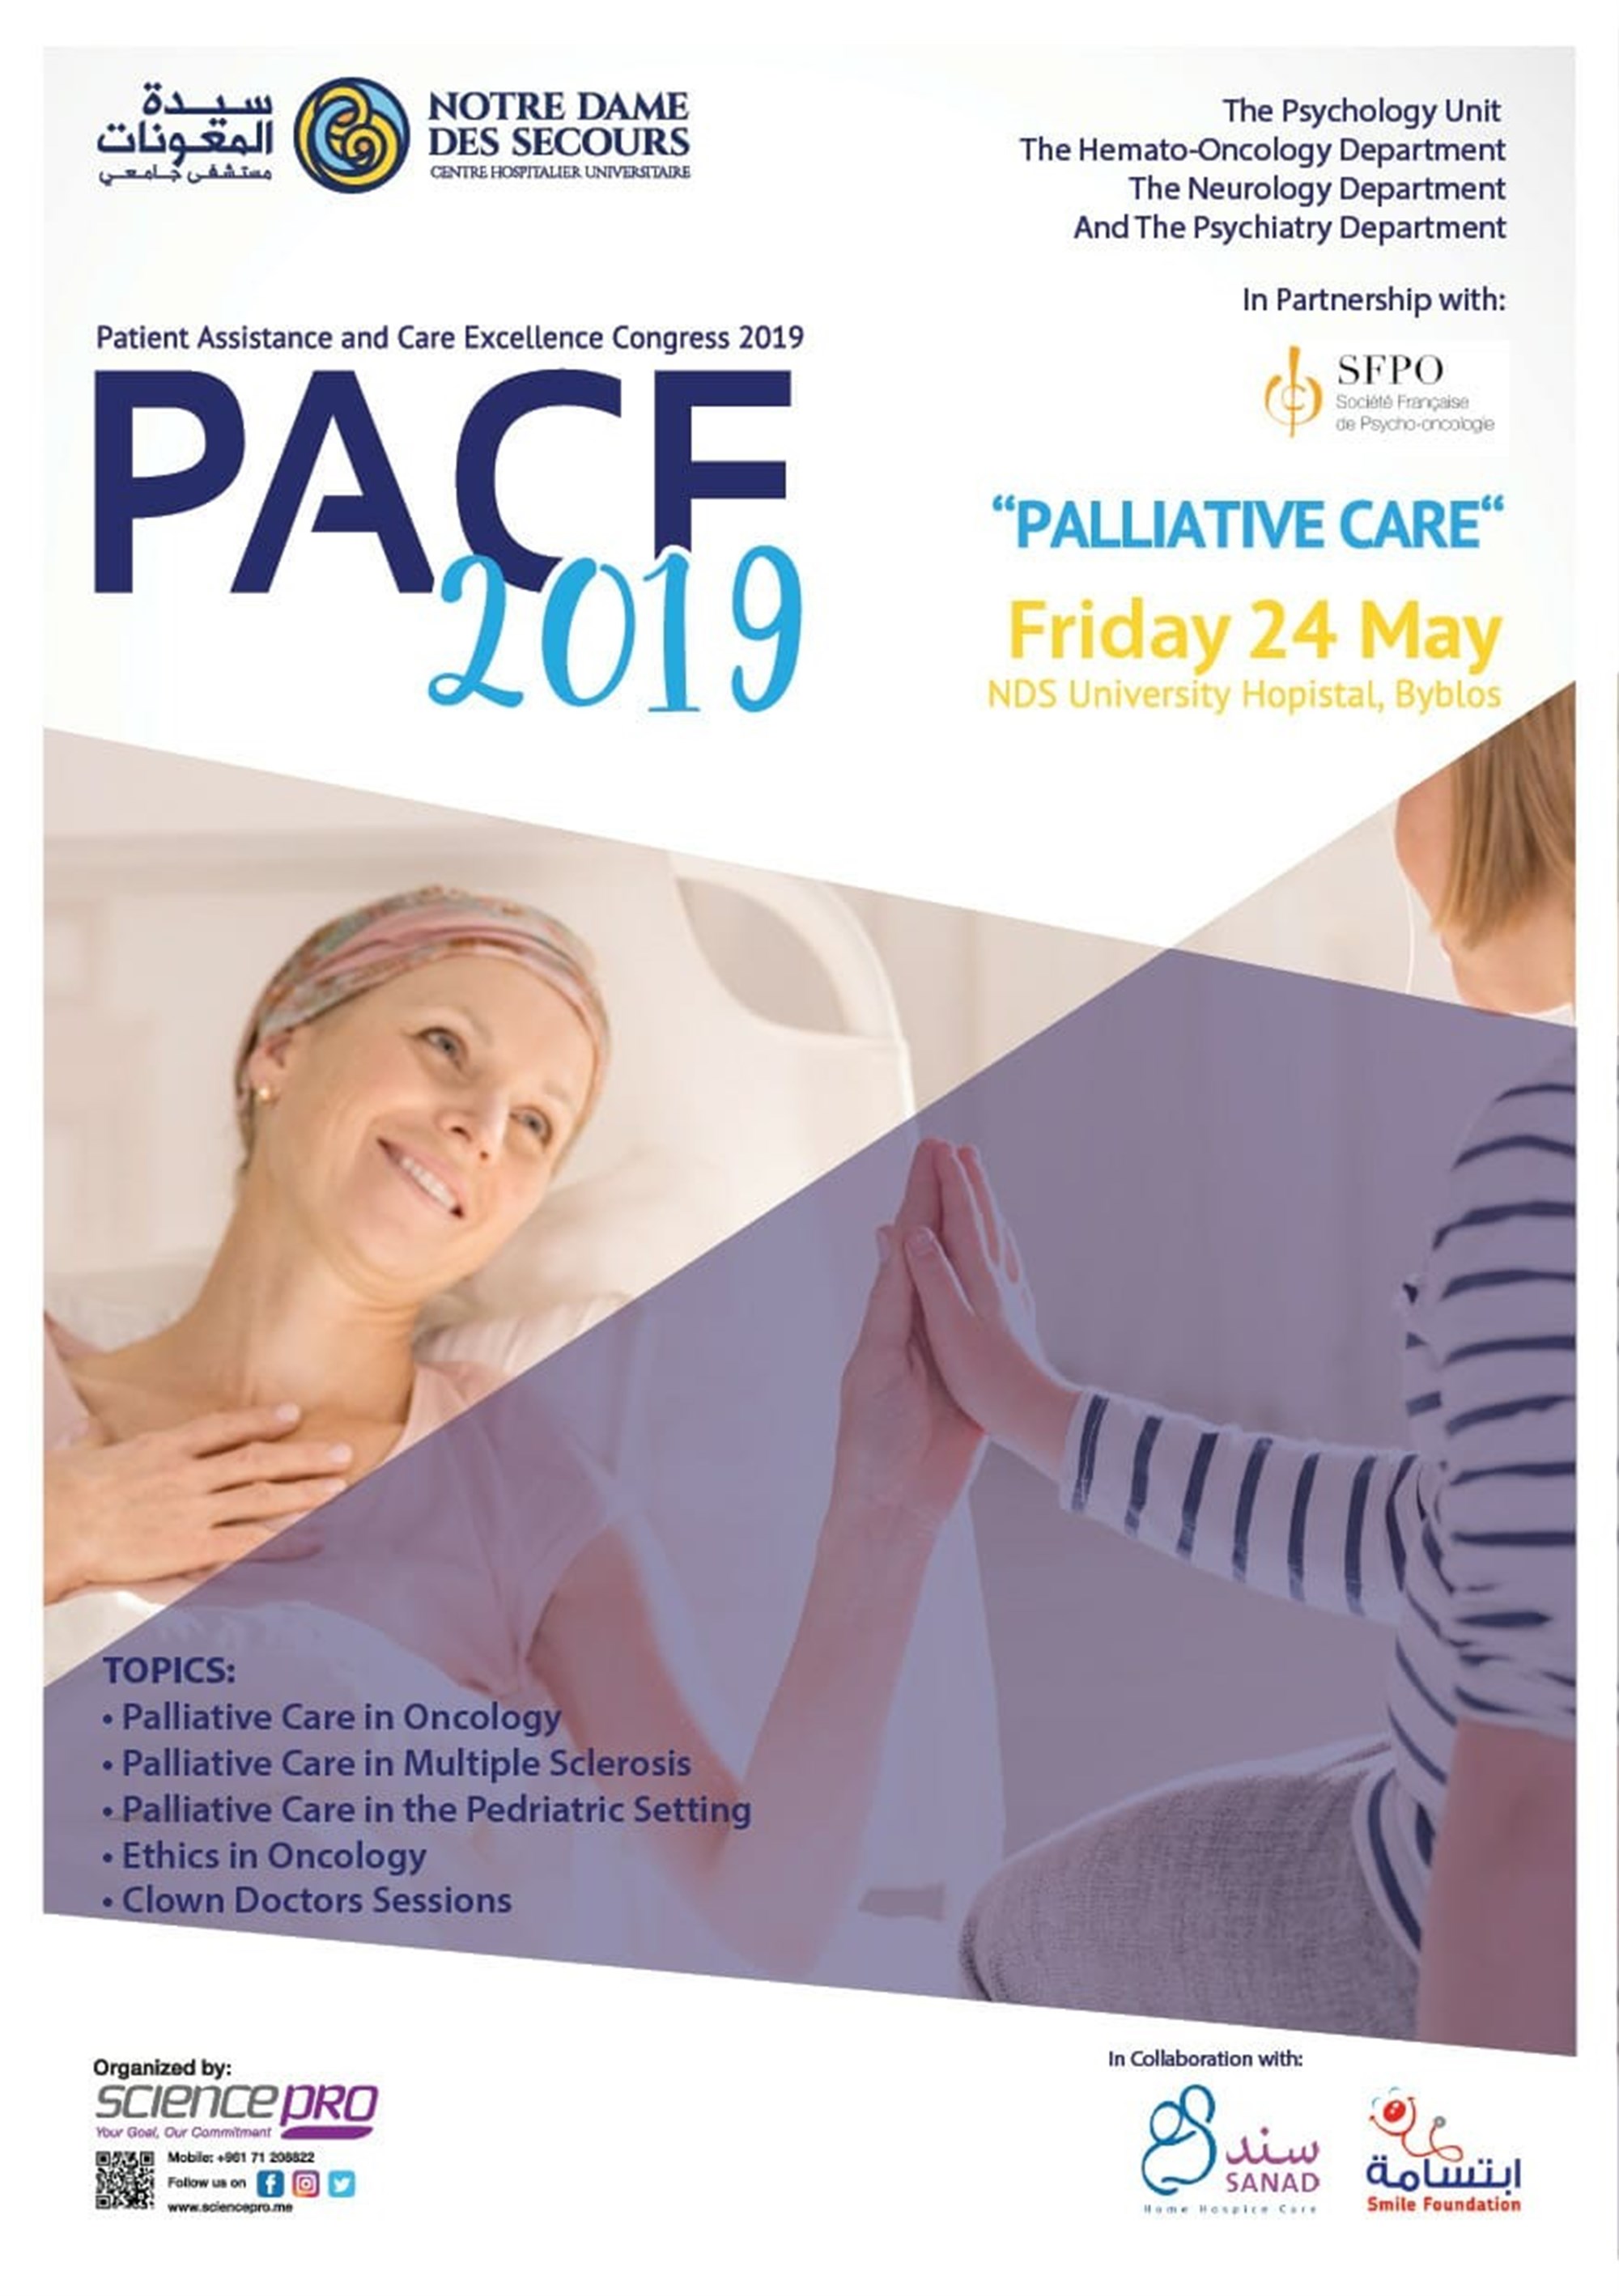 PACE 2019